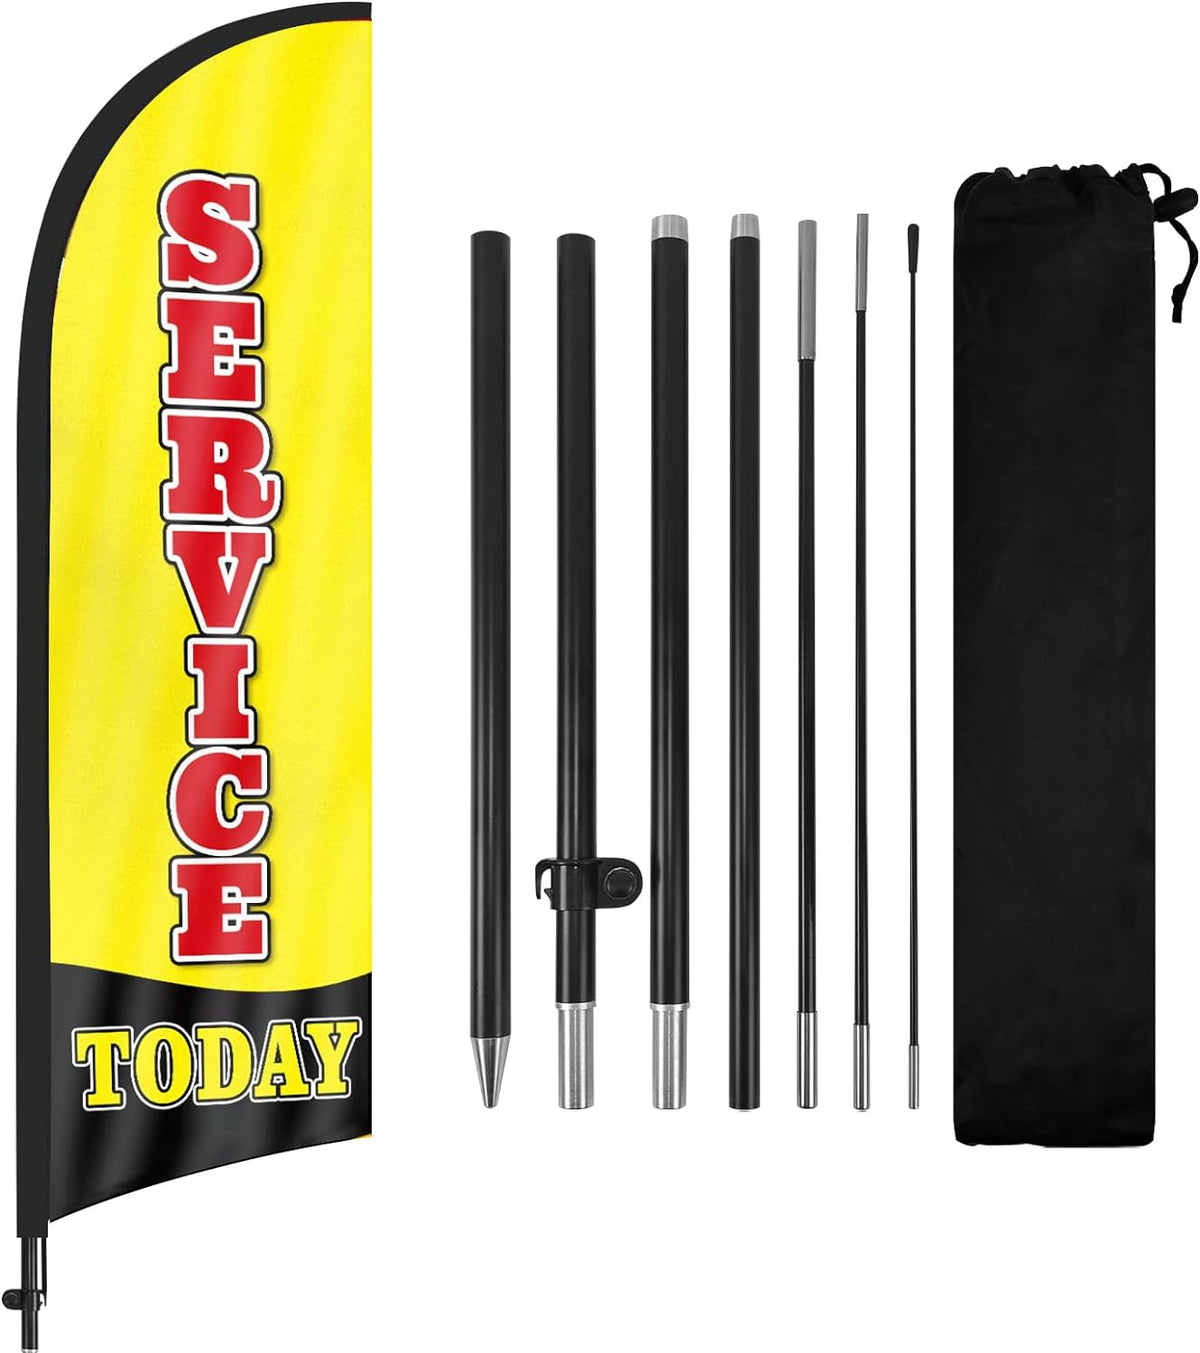 Service Today Feather Flag: Advertising Banner for Service Today Business (8ft)